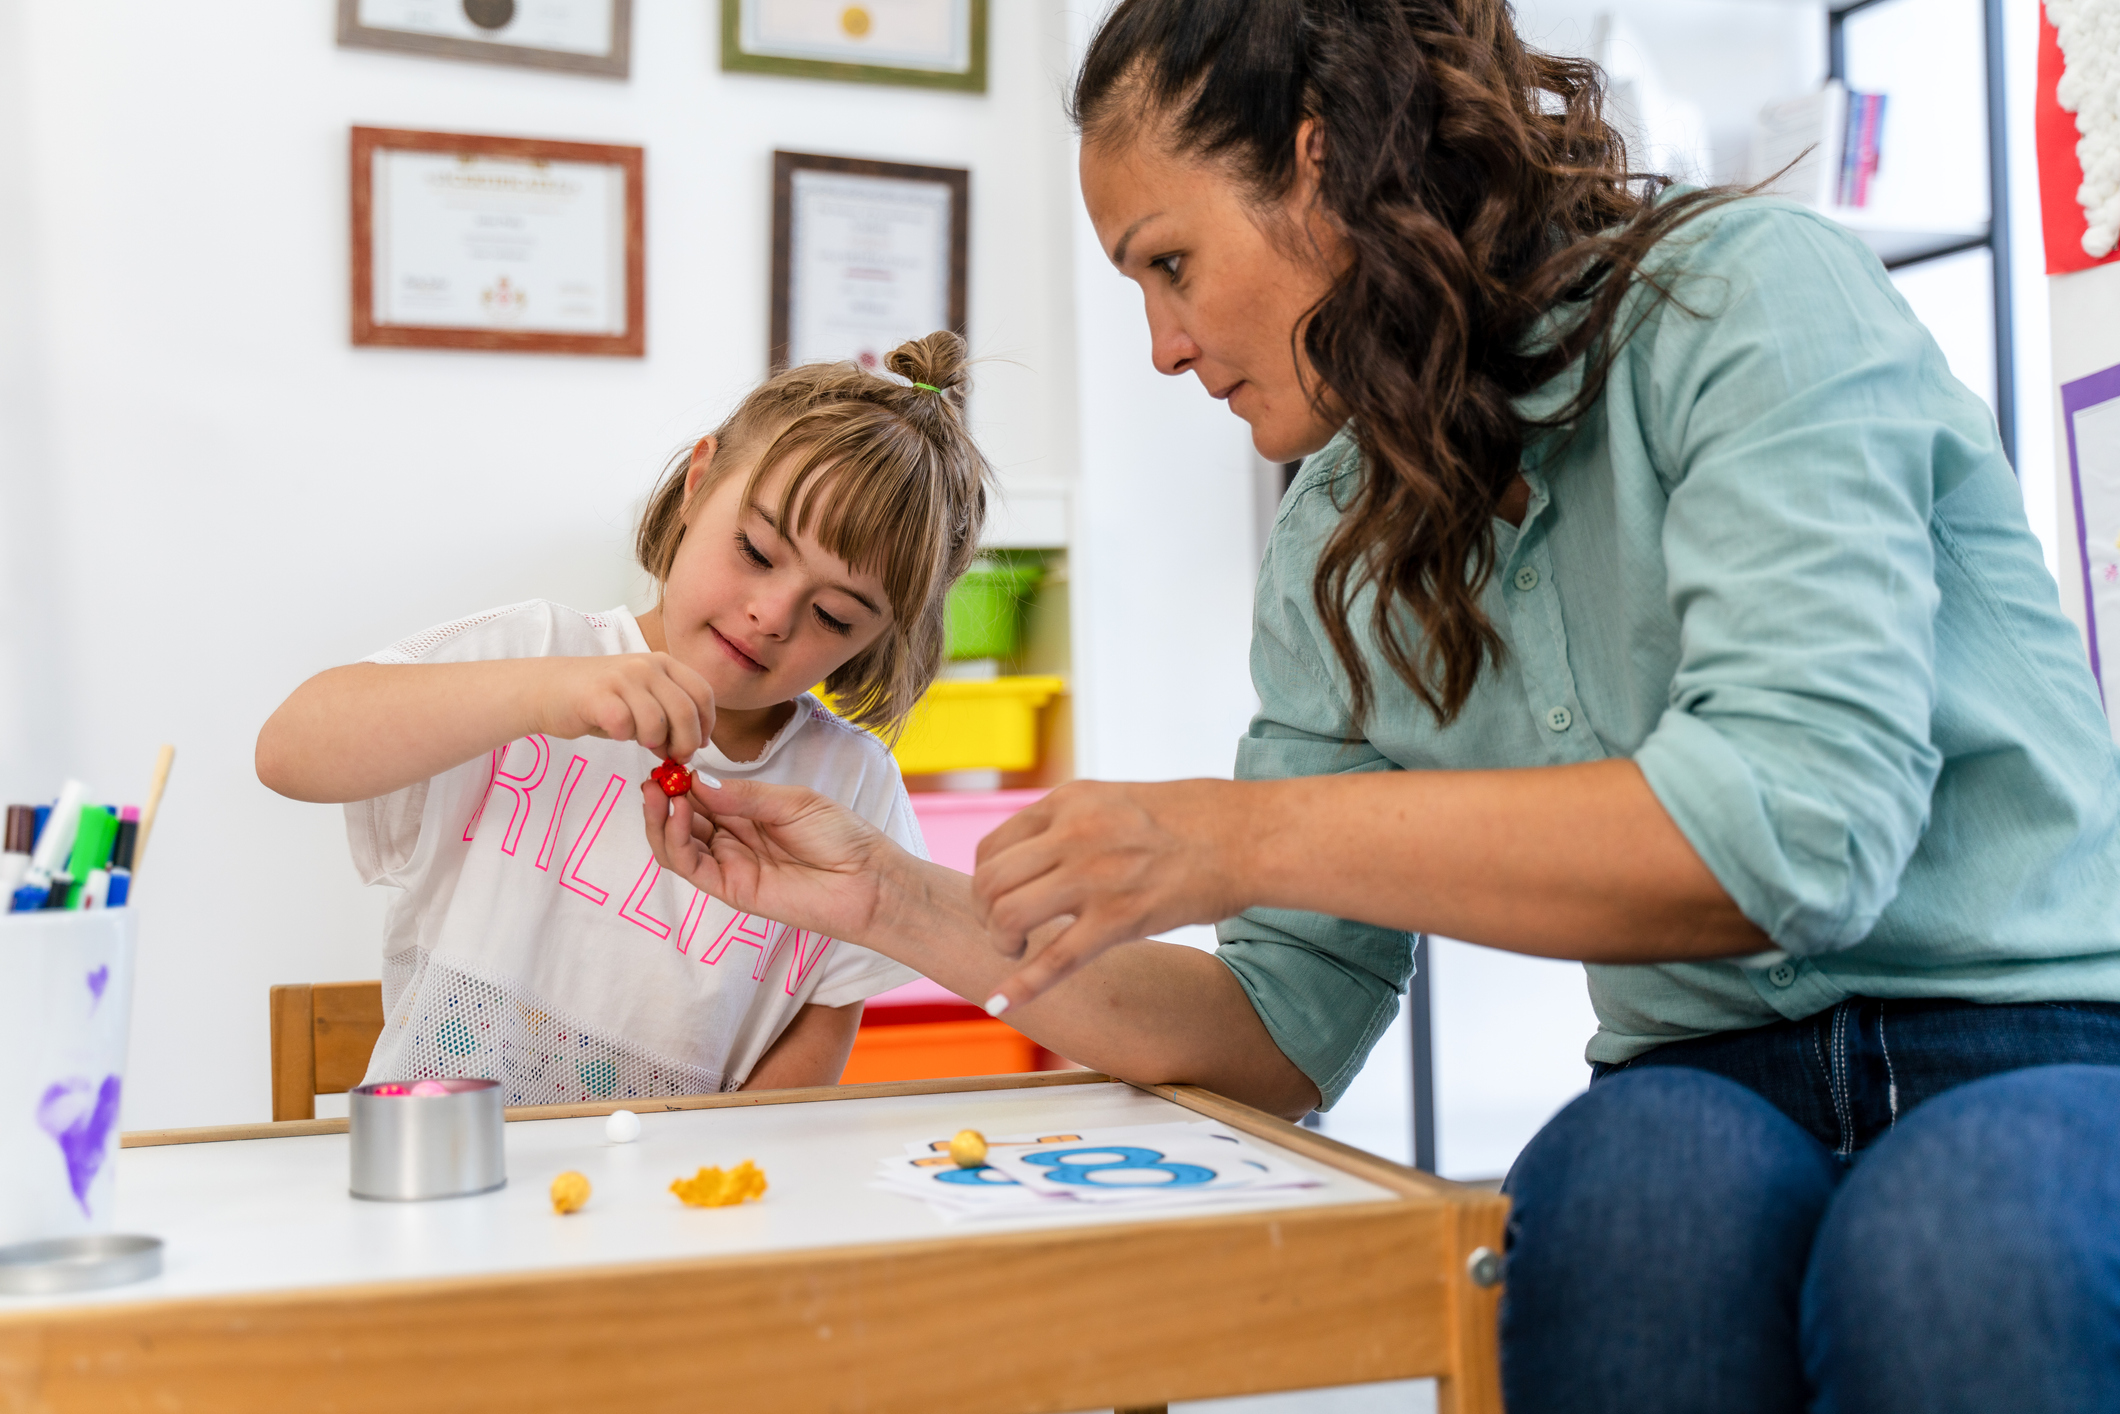 A Registered Behavior Technician working with a child during an ABA therapy session.